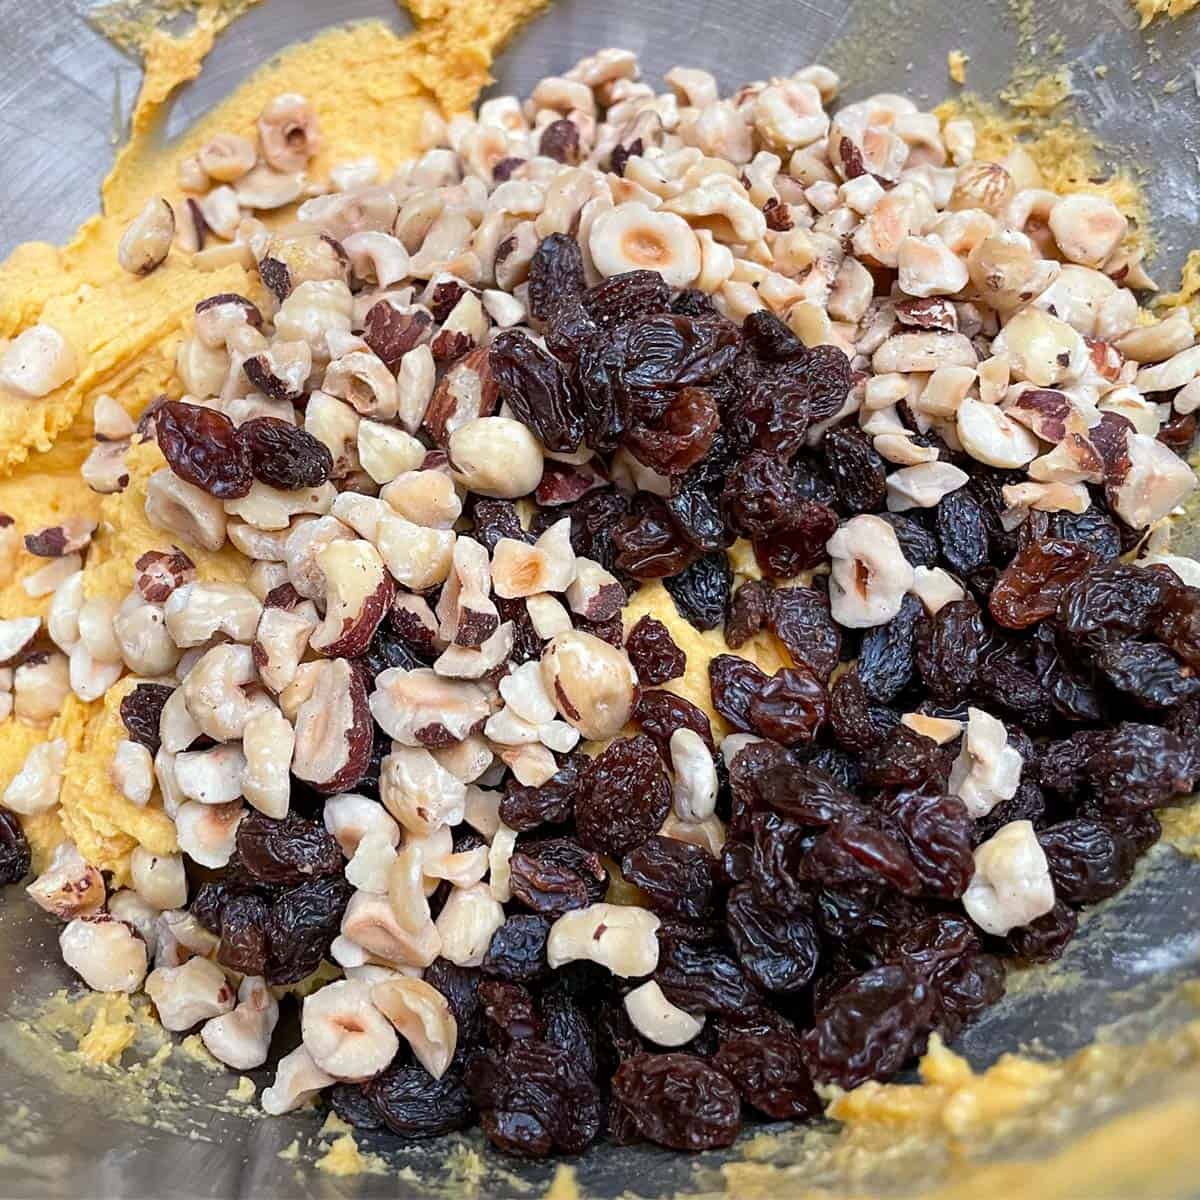 Raisins and chopped hazelnuts added to the cookies dough.